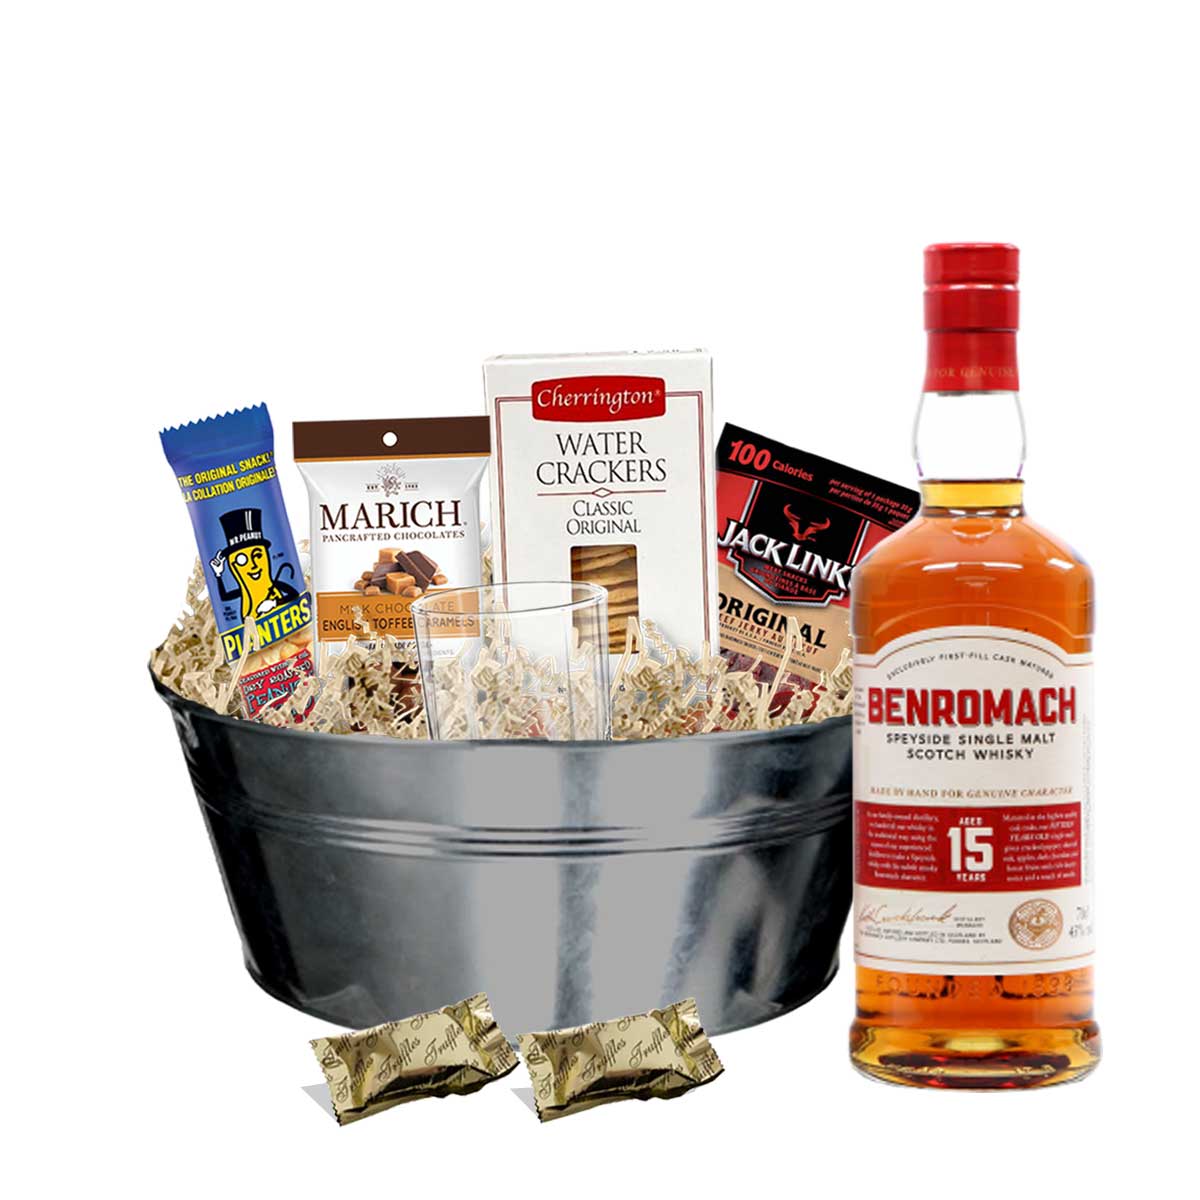 TAG Liquor Stores BC - Benromach 15 Year Old Scotch Whisky 750ml Gift Basket